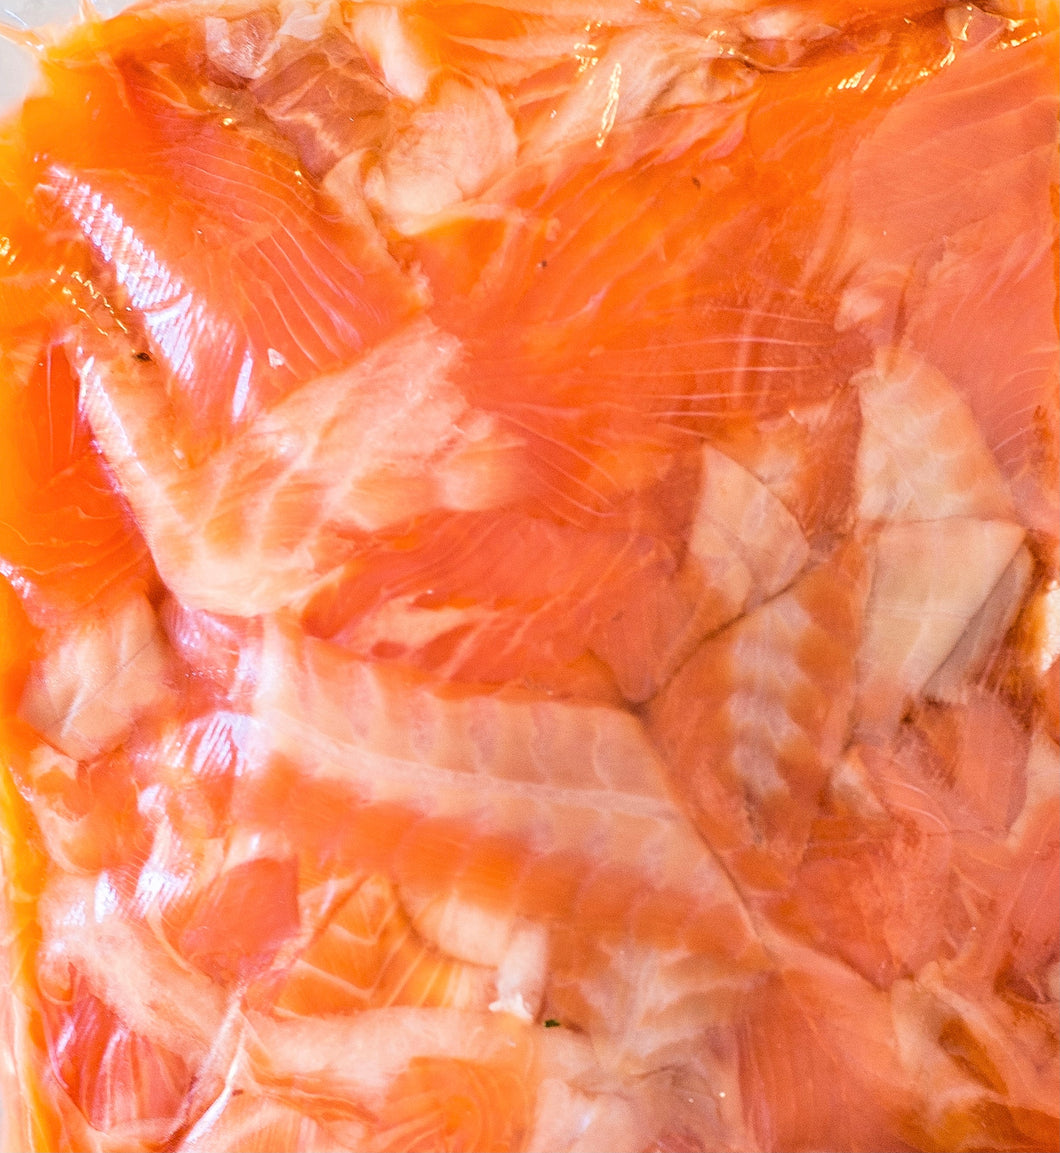 Three Streams Oak Smoked Salmon/Trout Offcuts 500g (DELIVERY IN CAPE TOWN METROPOLITAN ONLY)